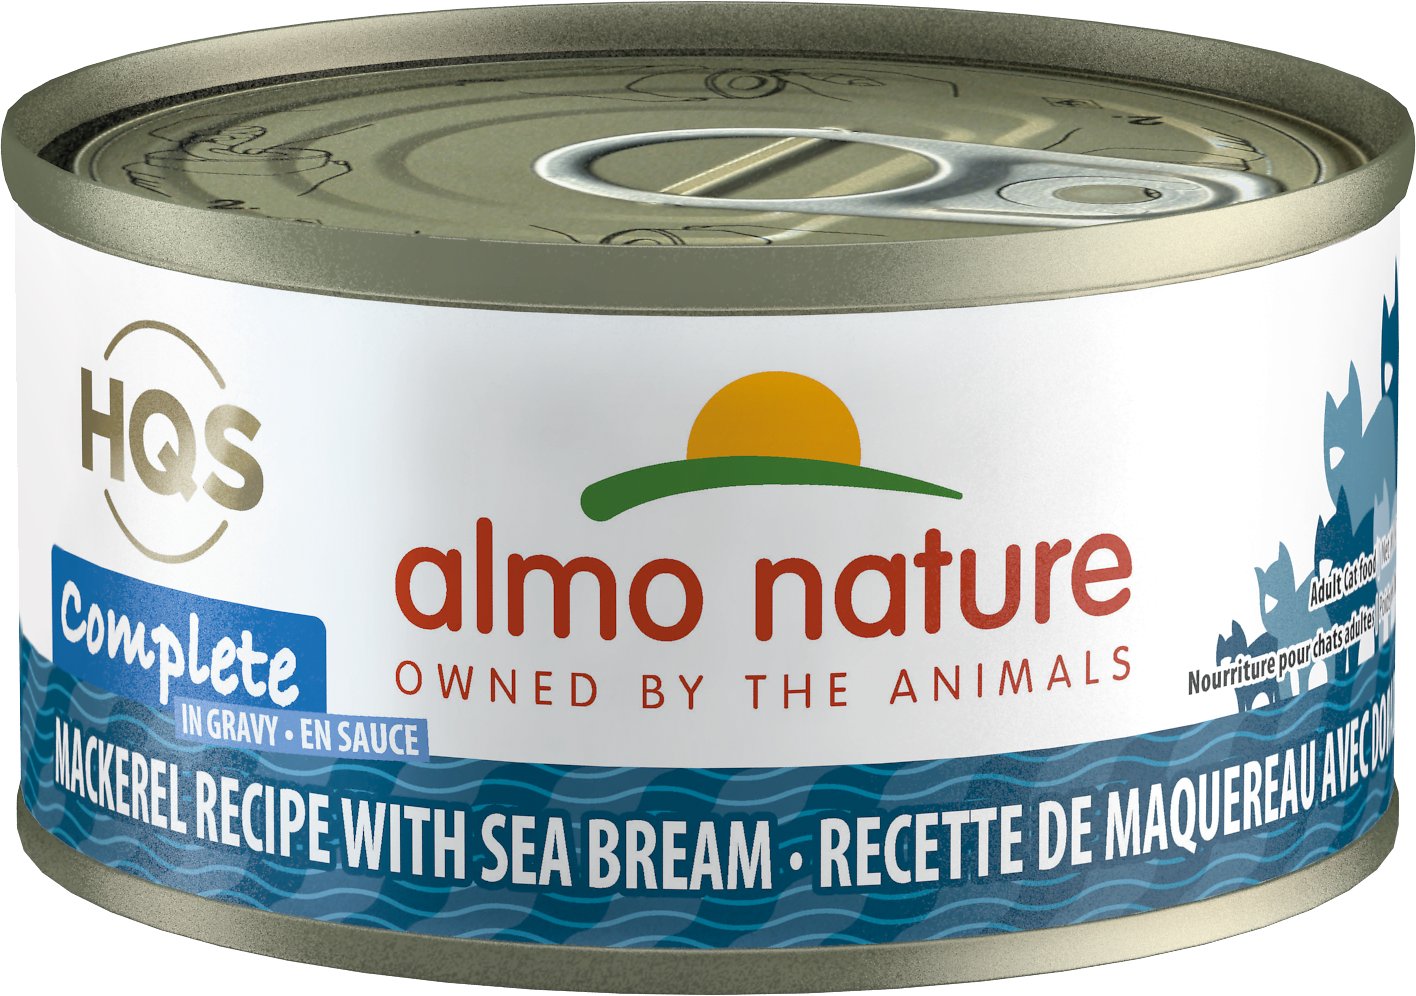 Almo Nature Complete Mackerel with Sea Bream in Gravy Canned Cat Food (70g/2.47oz)